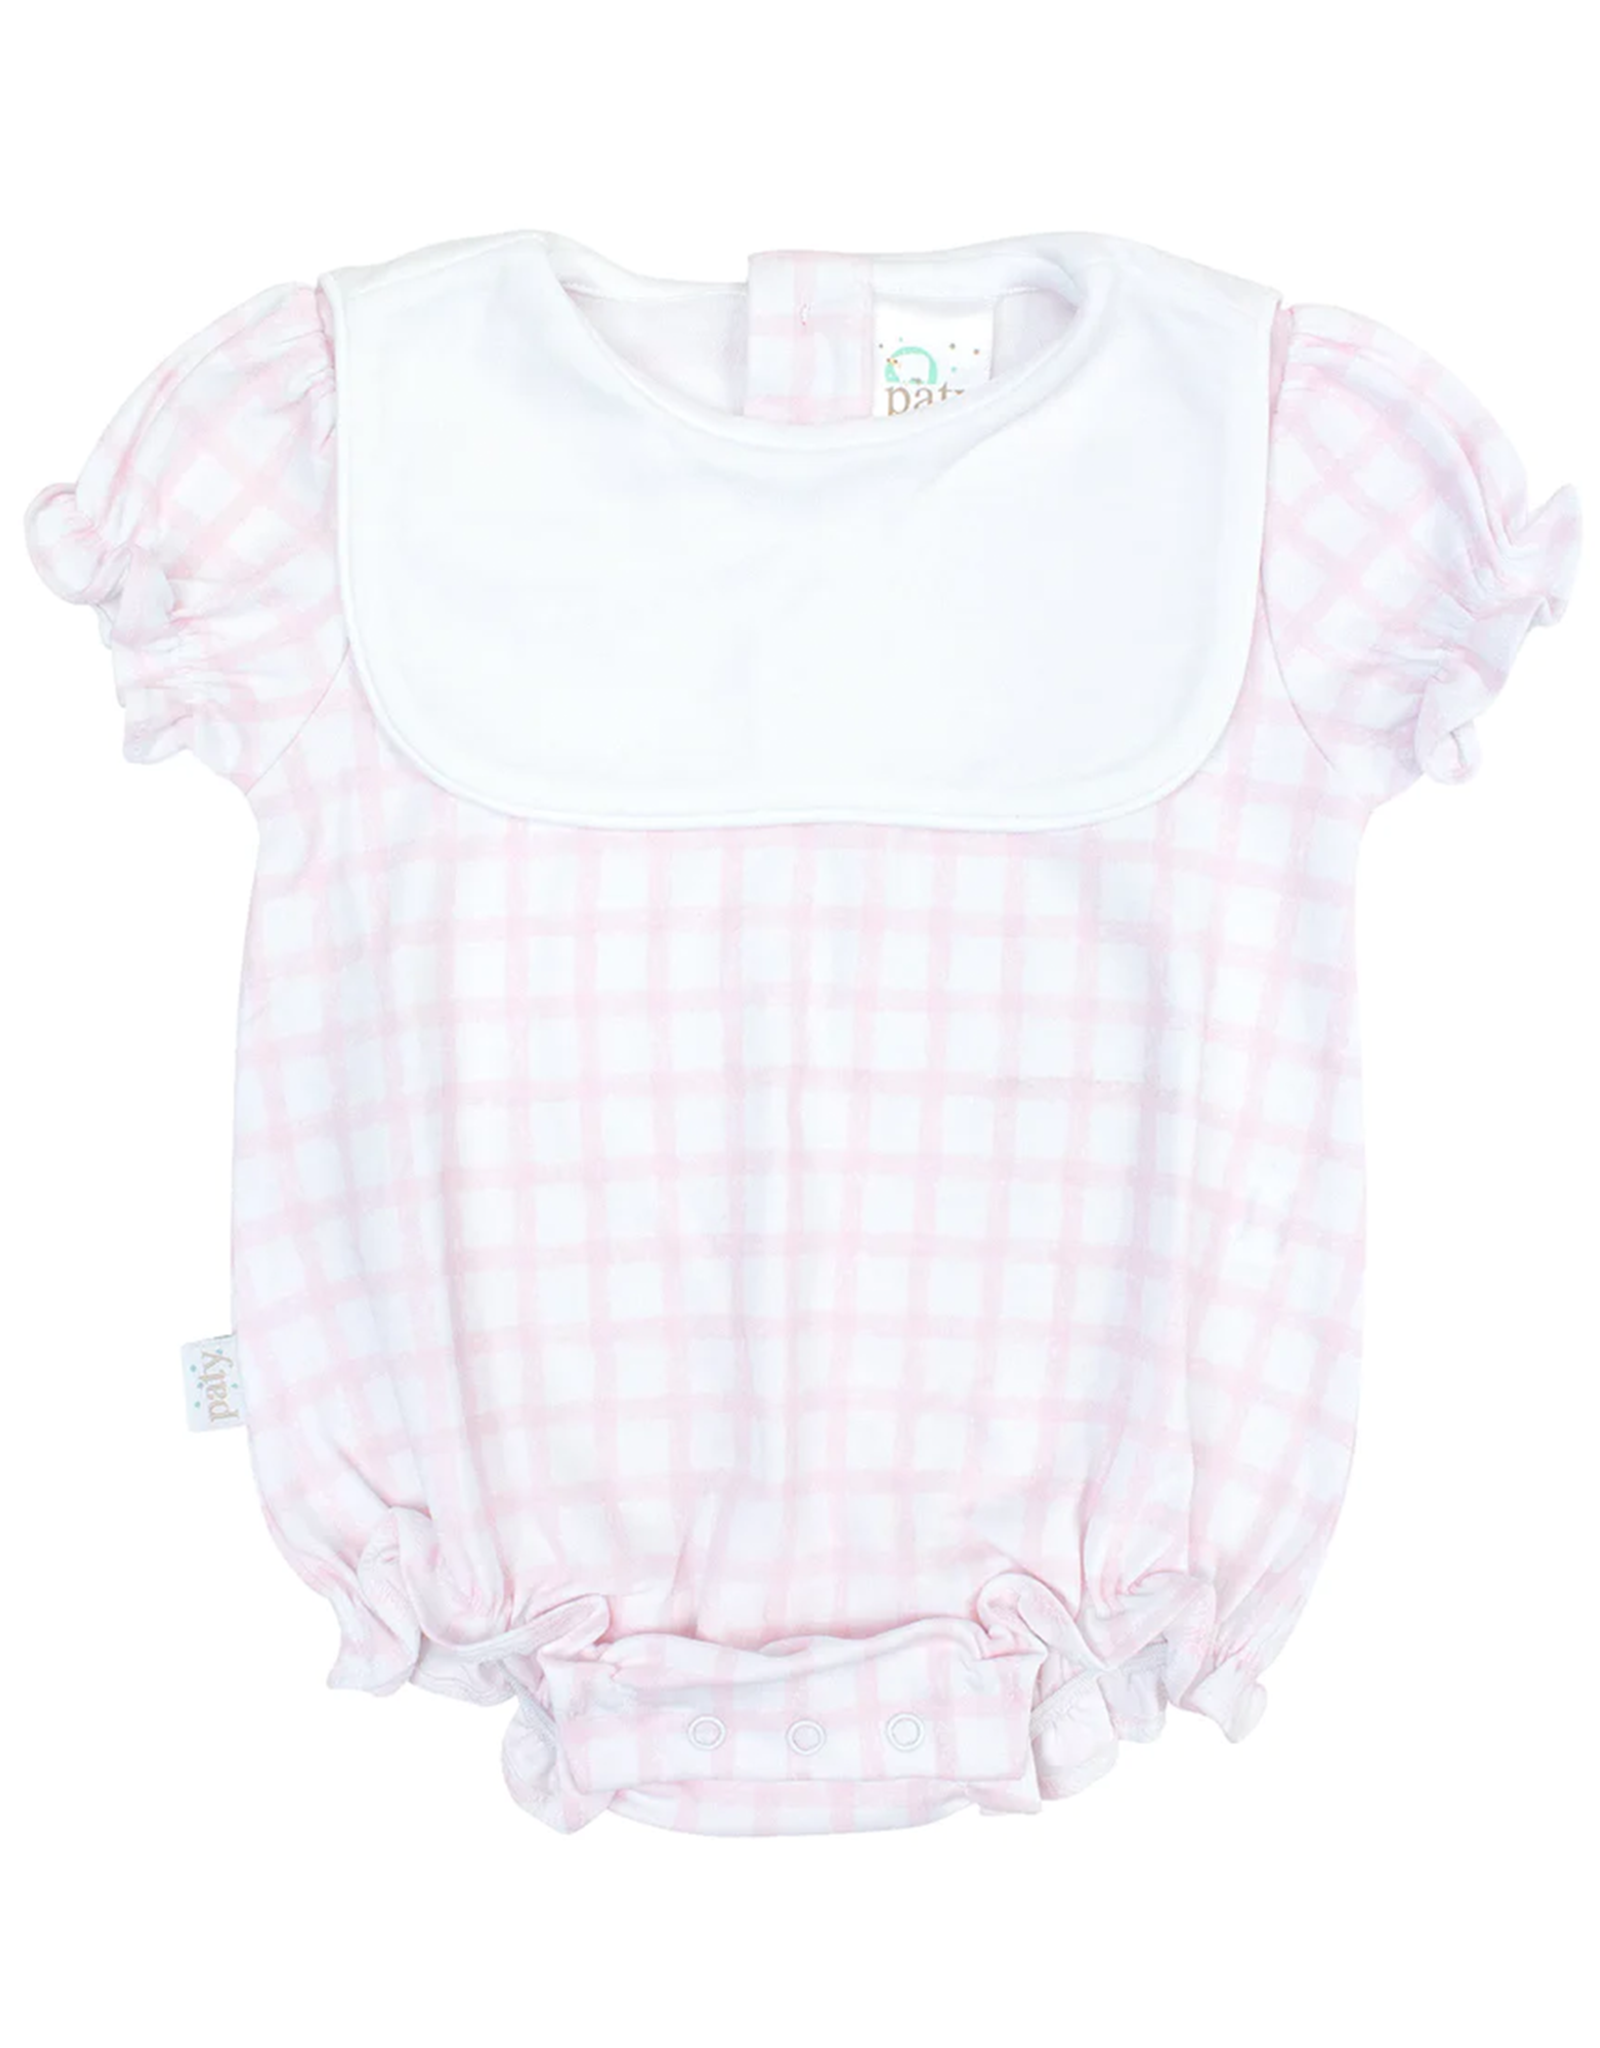 Paty, Inc. 1509GHM Pink Gingham Knit Bubble